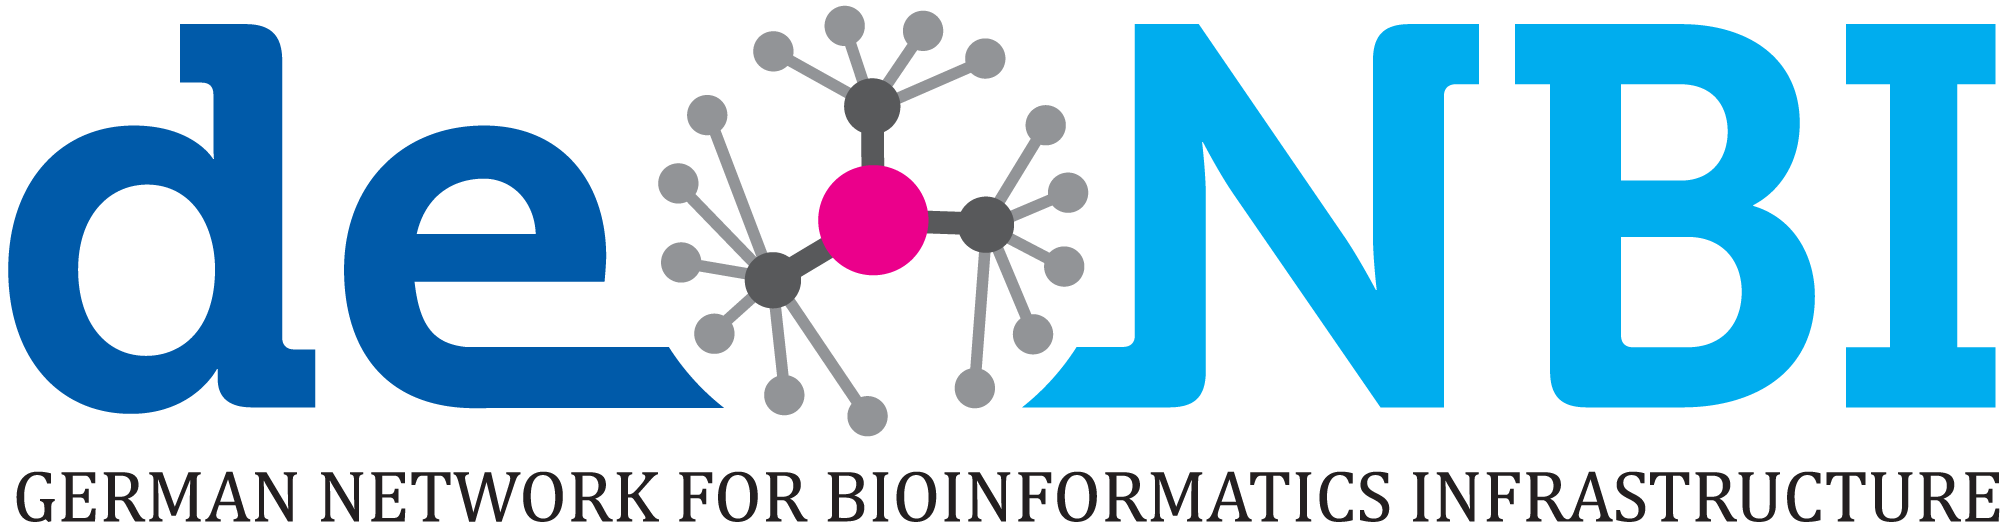 Sabio-RK is funded through the German Network for Bioinformatics Infrastructure